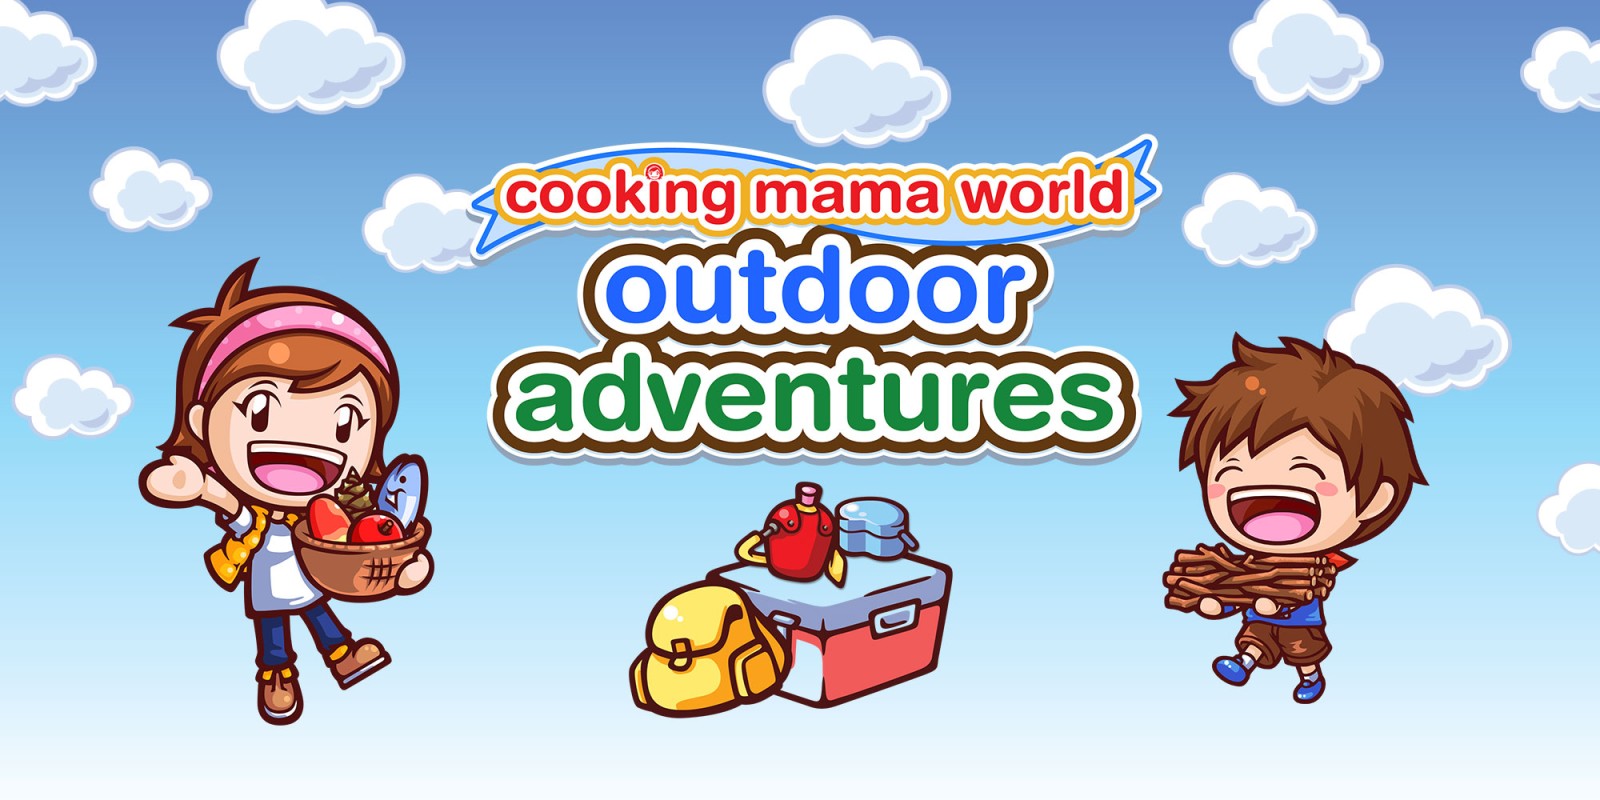 Cooking games play online - PlayMiniGames